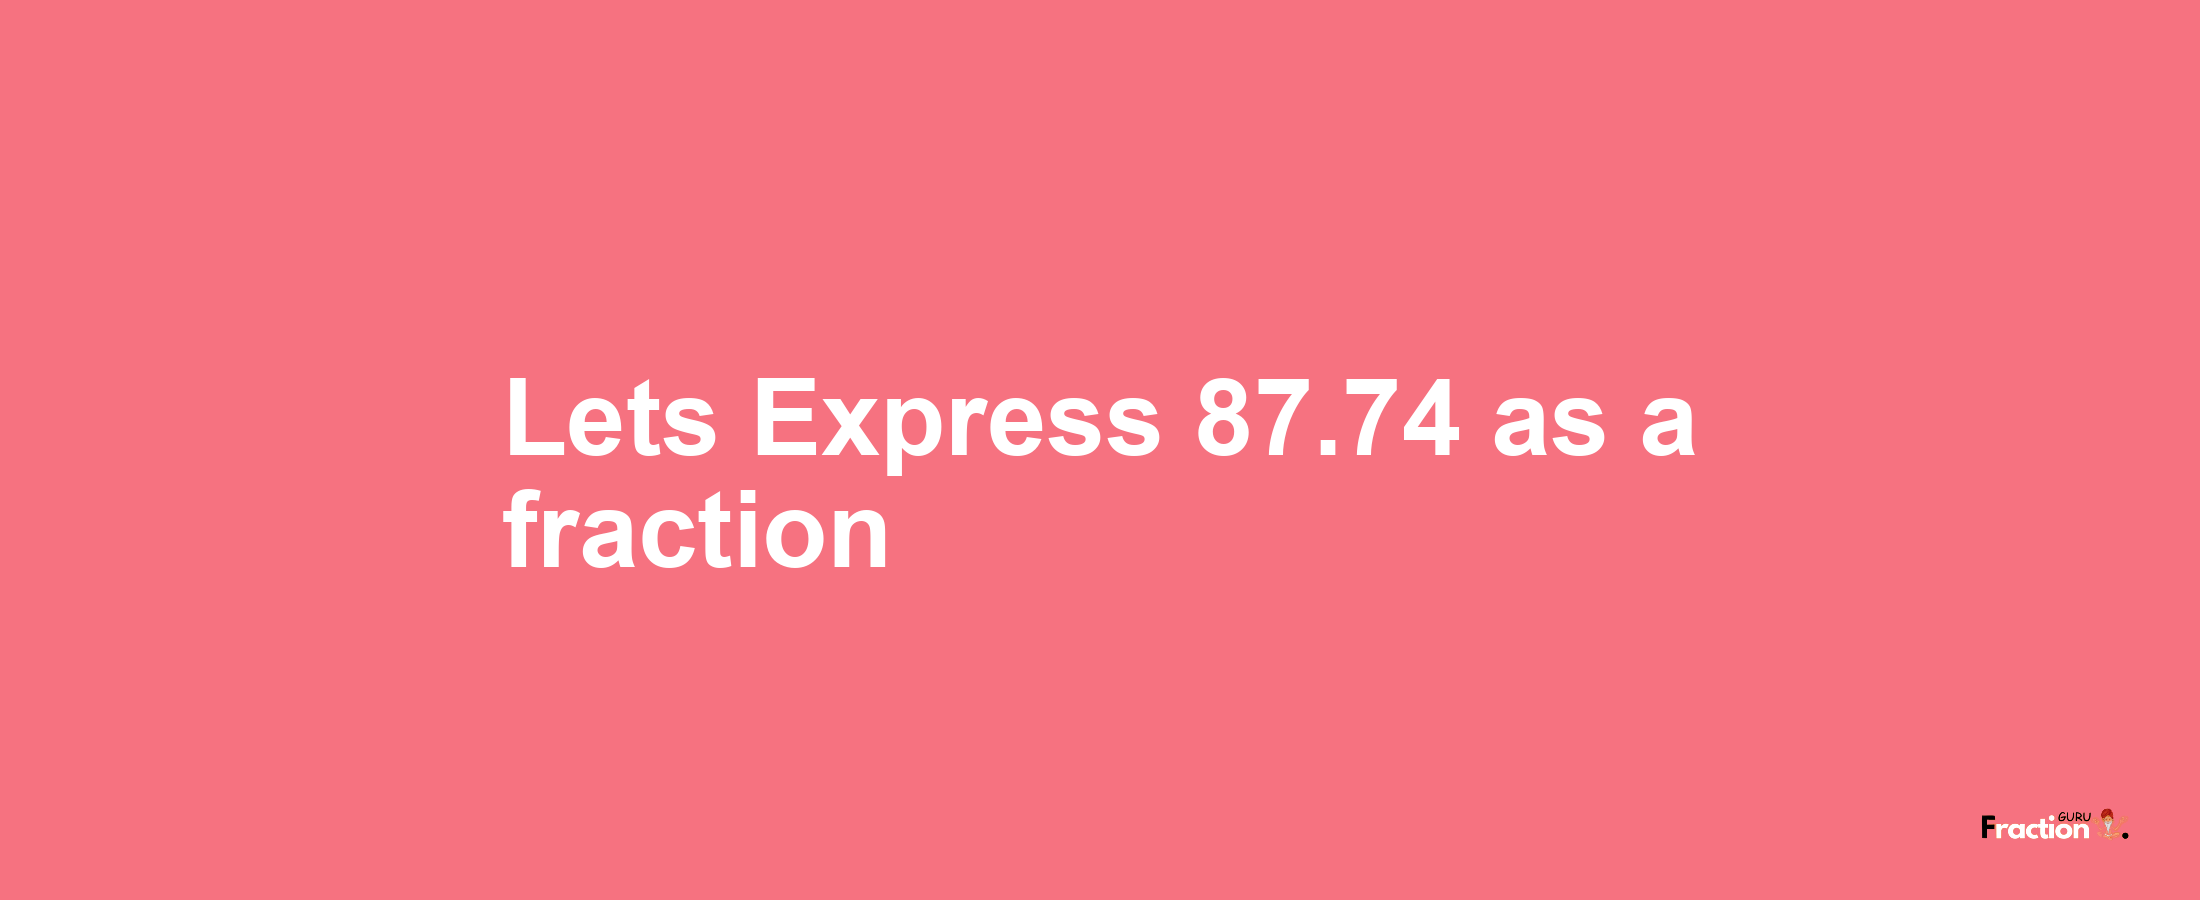 Lets Express 87.74 as afraction